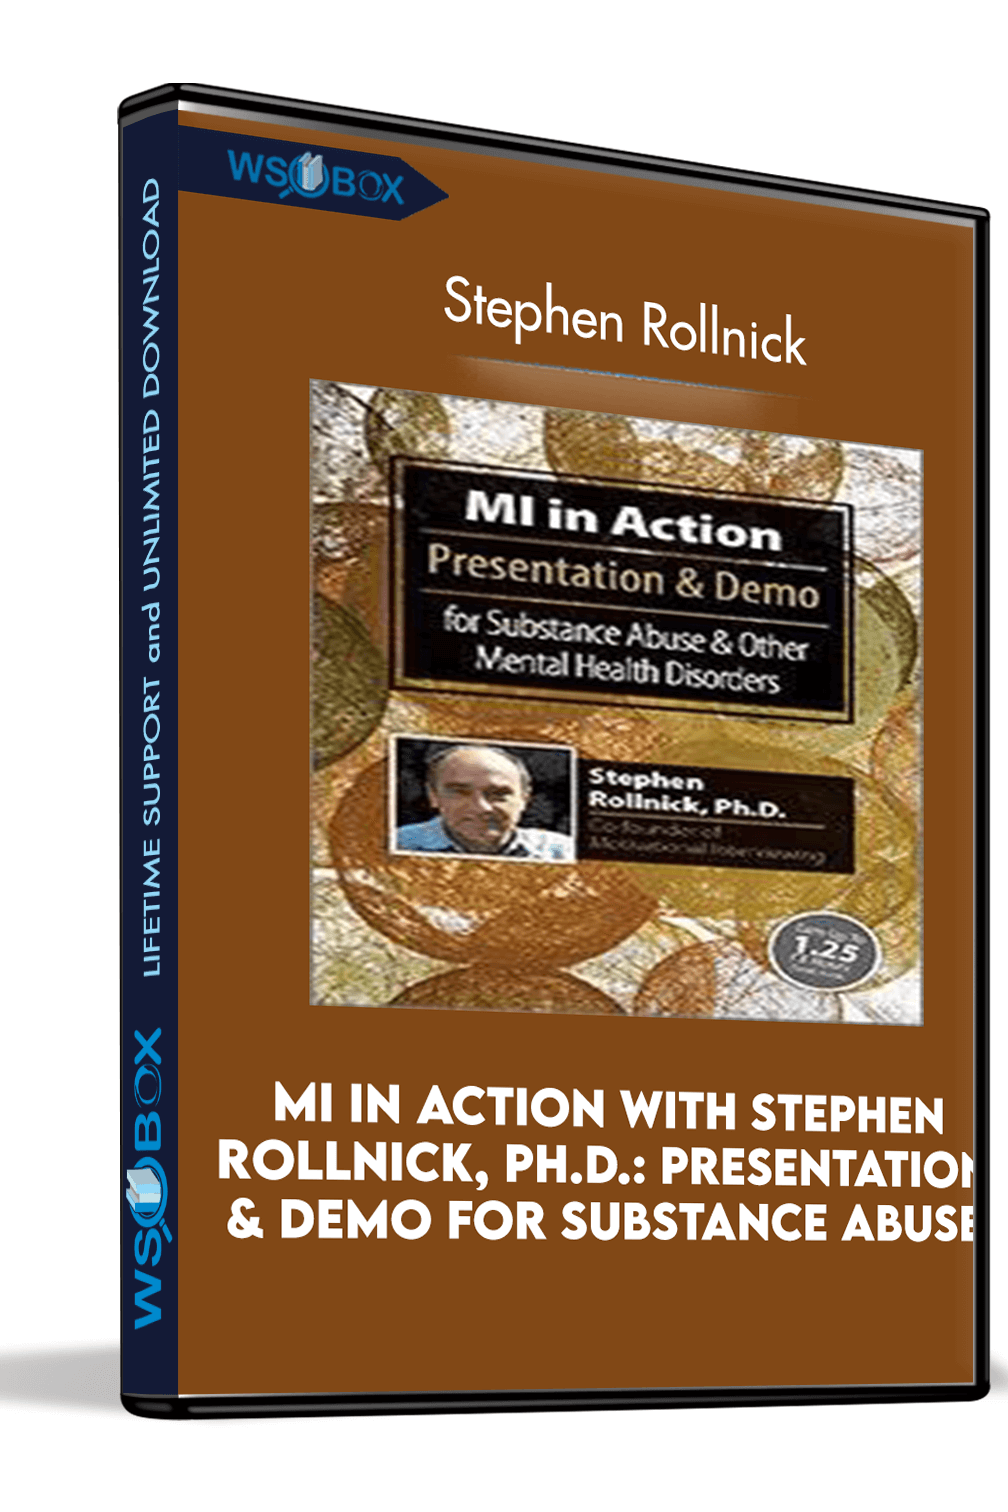 mi-in-action-with-stephen-rollnick-phd-presentation-demo-for-substance-abuse-other-mental-health-disorders-stephen-rollnick